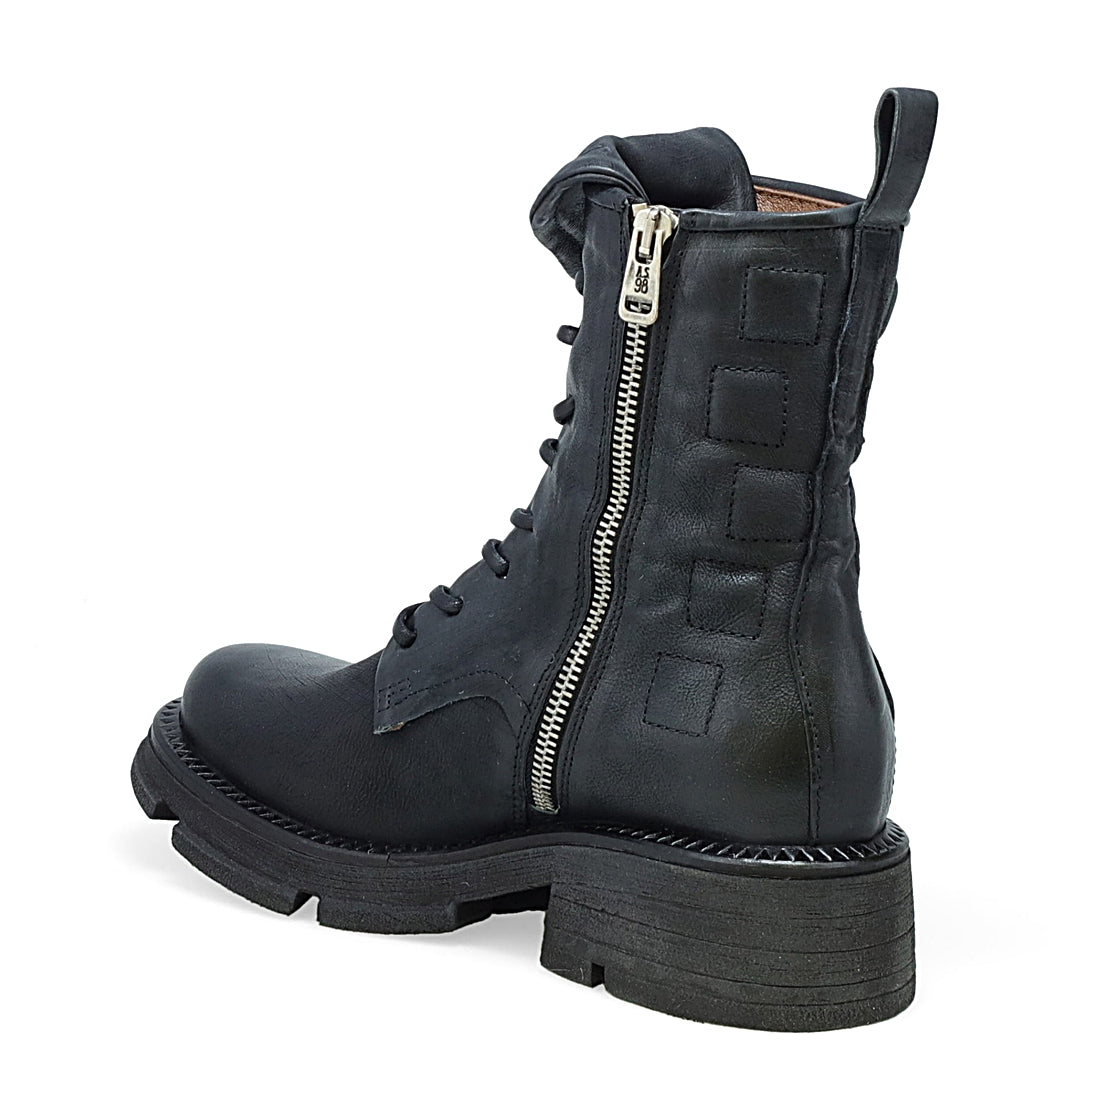 Inner side back view of the AS98 Lockwood Lace Up Combat Boot. This black boot features and inner zipper and geometric squares stitched into the side and back of the upper.